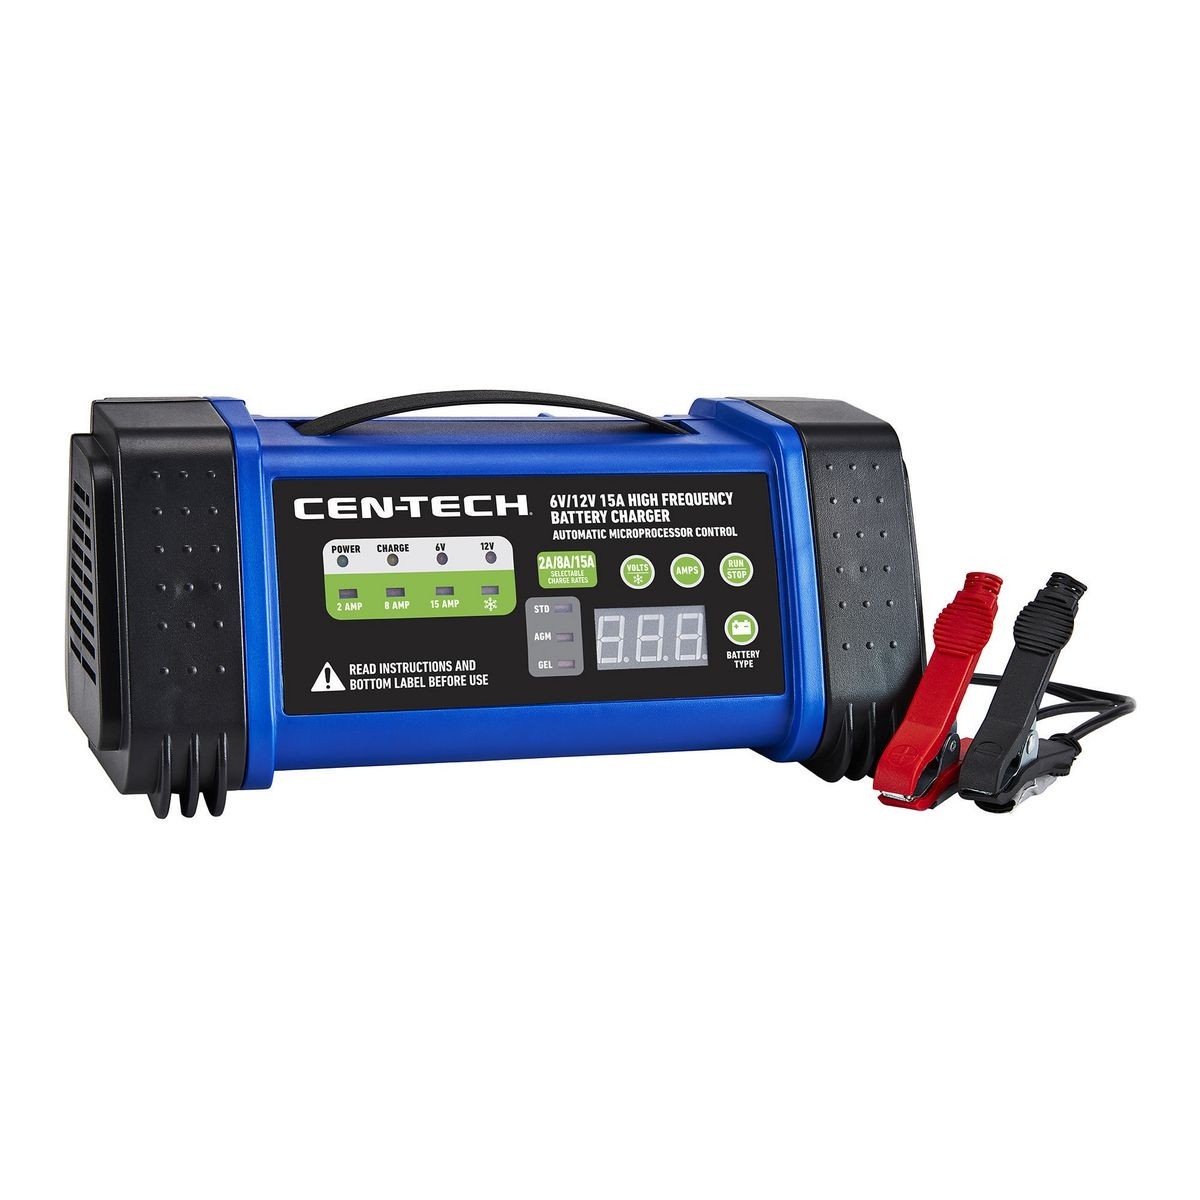 is cen tech battery charger any good